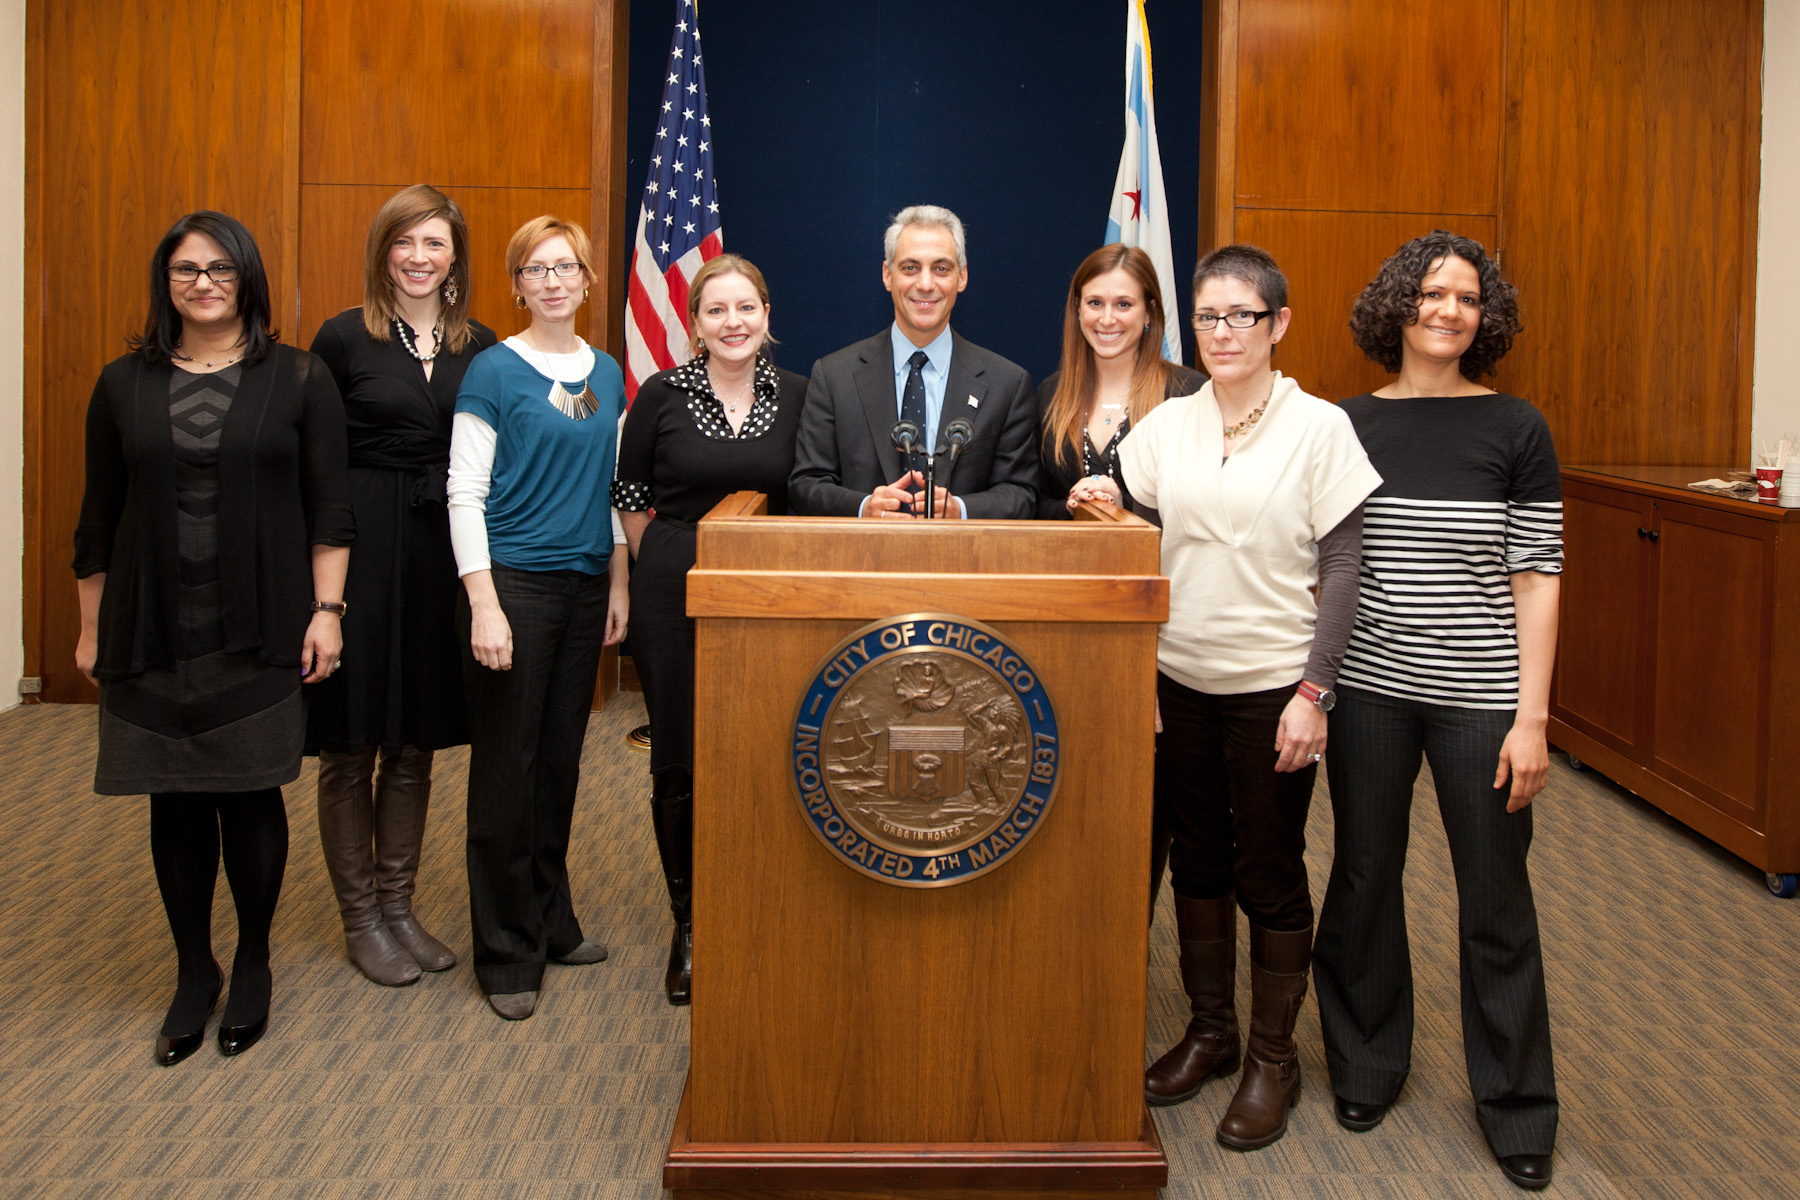 Mayor Rahm Emanuel today joined the inaugural meeting of a new “Women Who Launch” series, which brings together leading women in Chicago’s tech start-up community with leading female City officials as part of the administrations’ continuing efforts to create opportunity for Chicago’s booming technology industry.